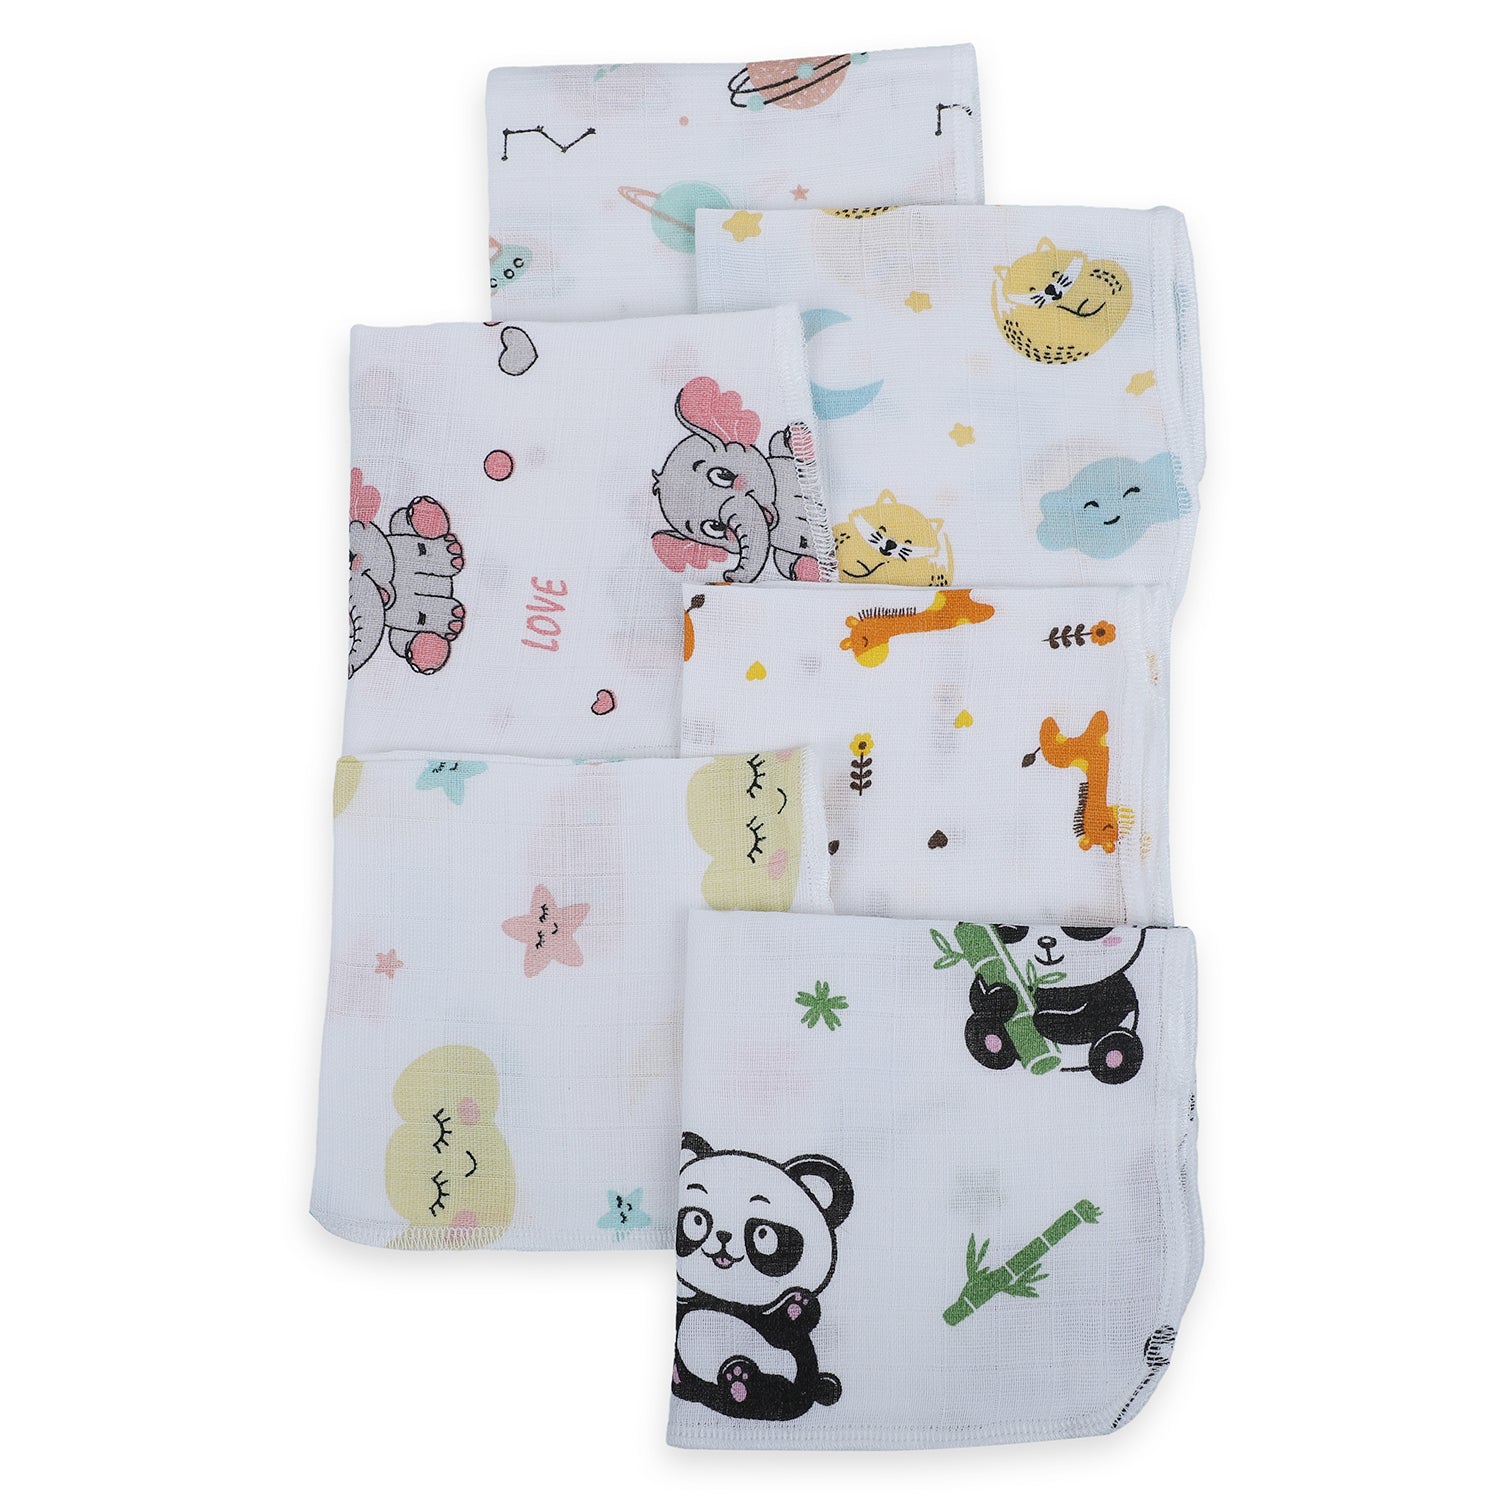 Baby Moo Highly Absorbent Cotton 6 Pcs Wash Cloth - Multicolour